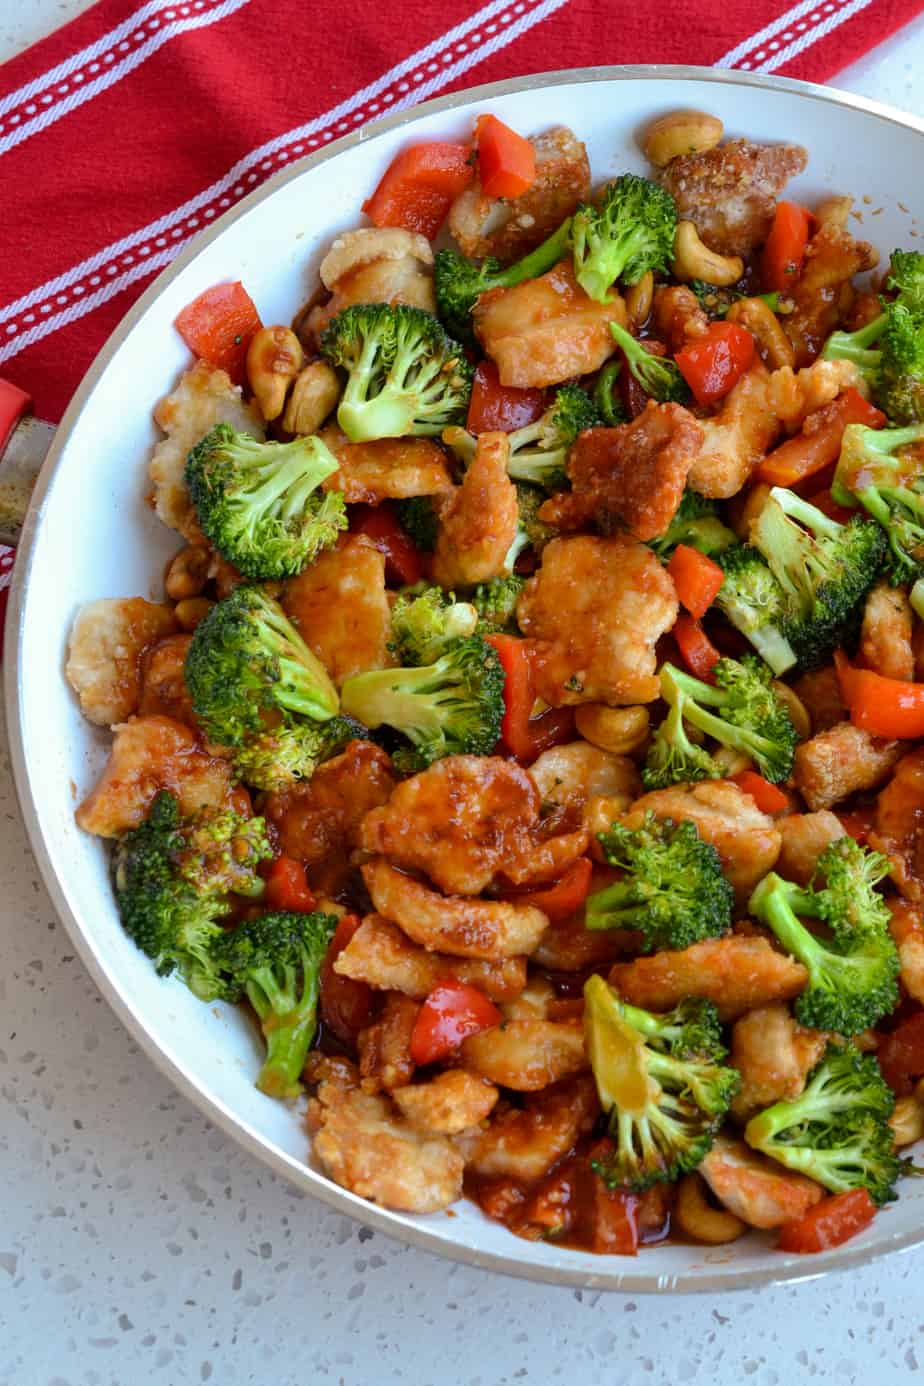 A skillet full of pan fried chicken, broccoli, red peppers and cashews in a sweet and spicy sauce. 